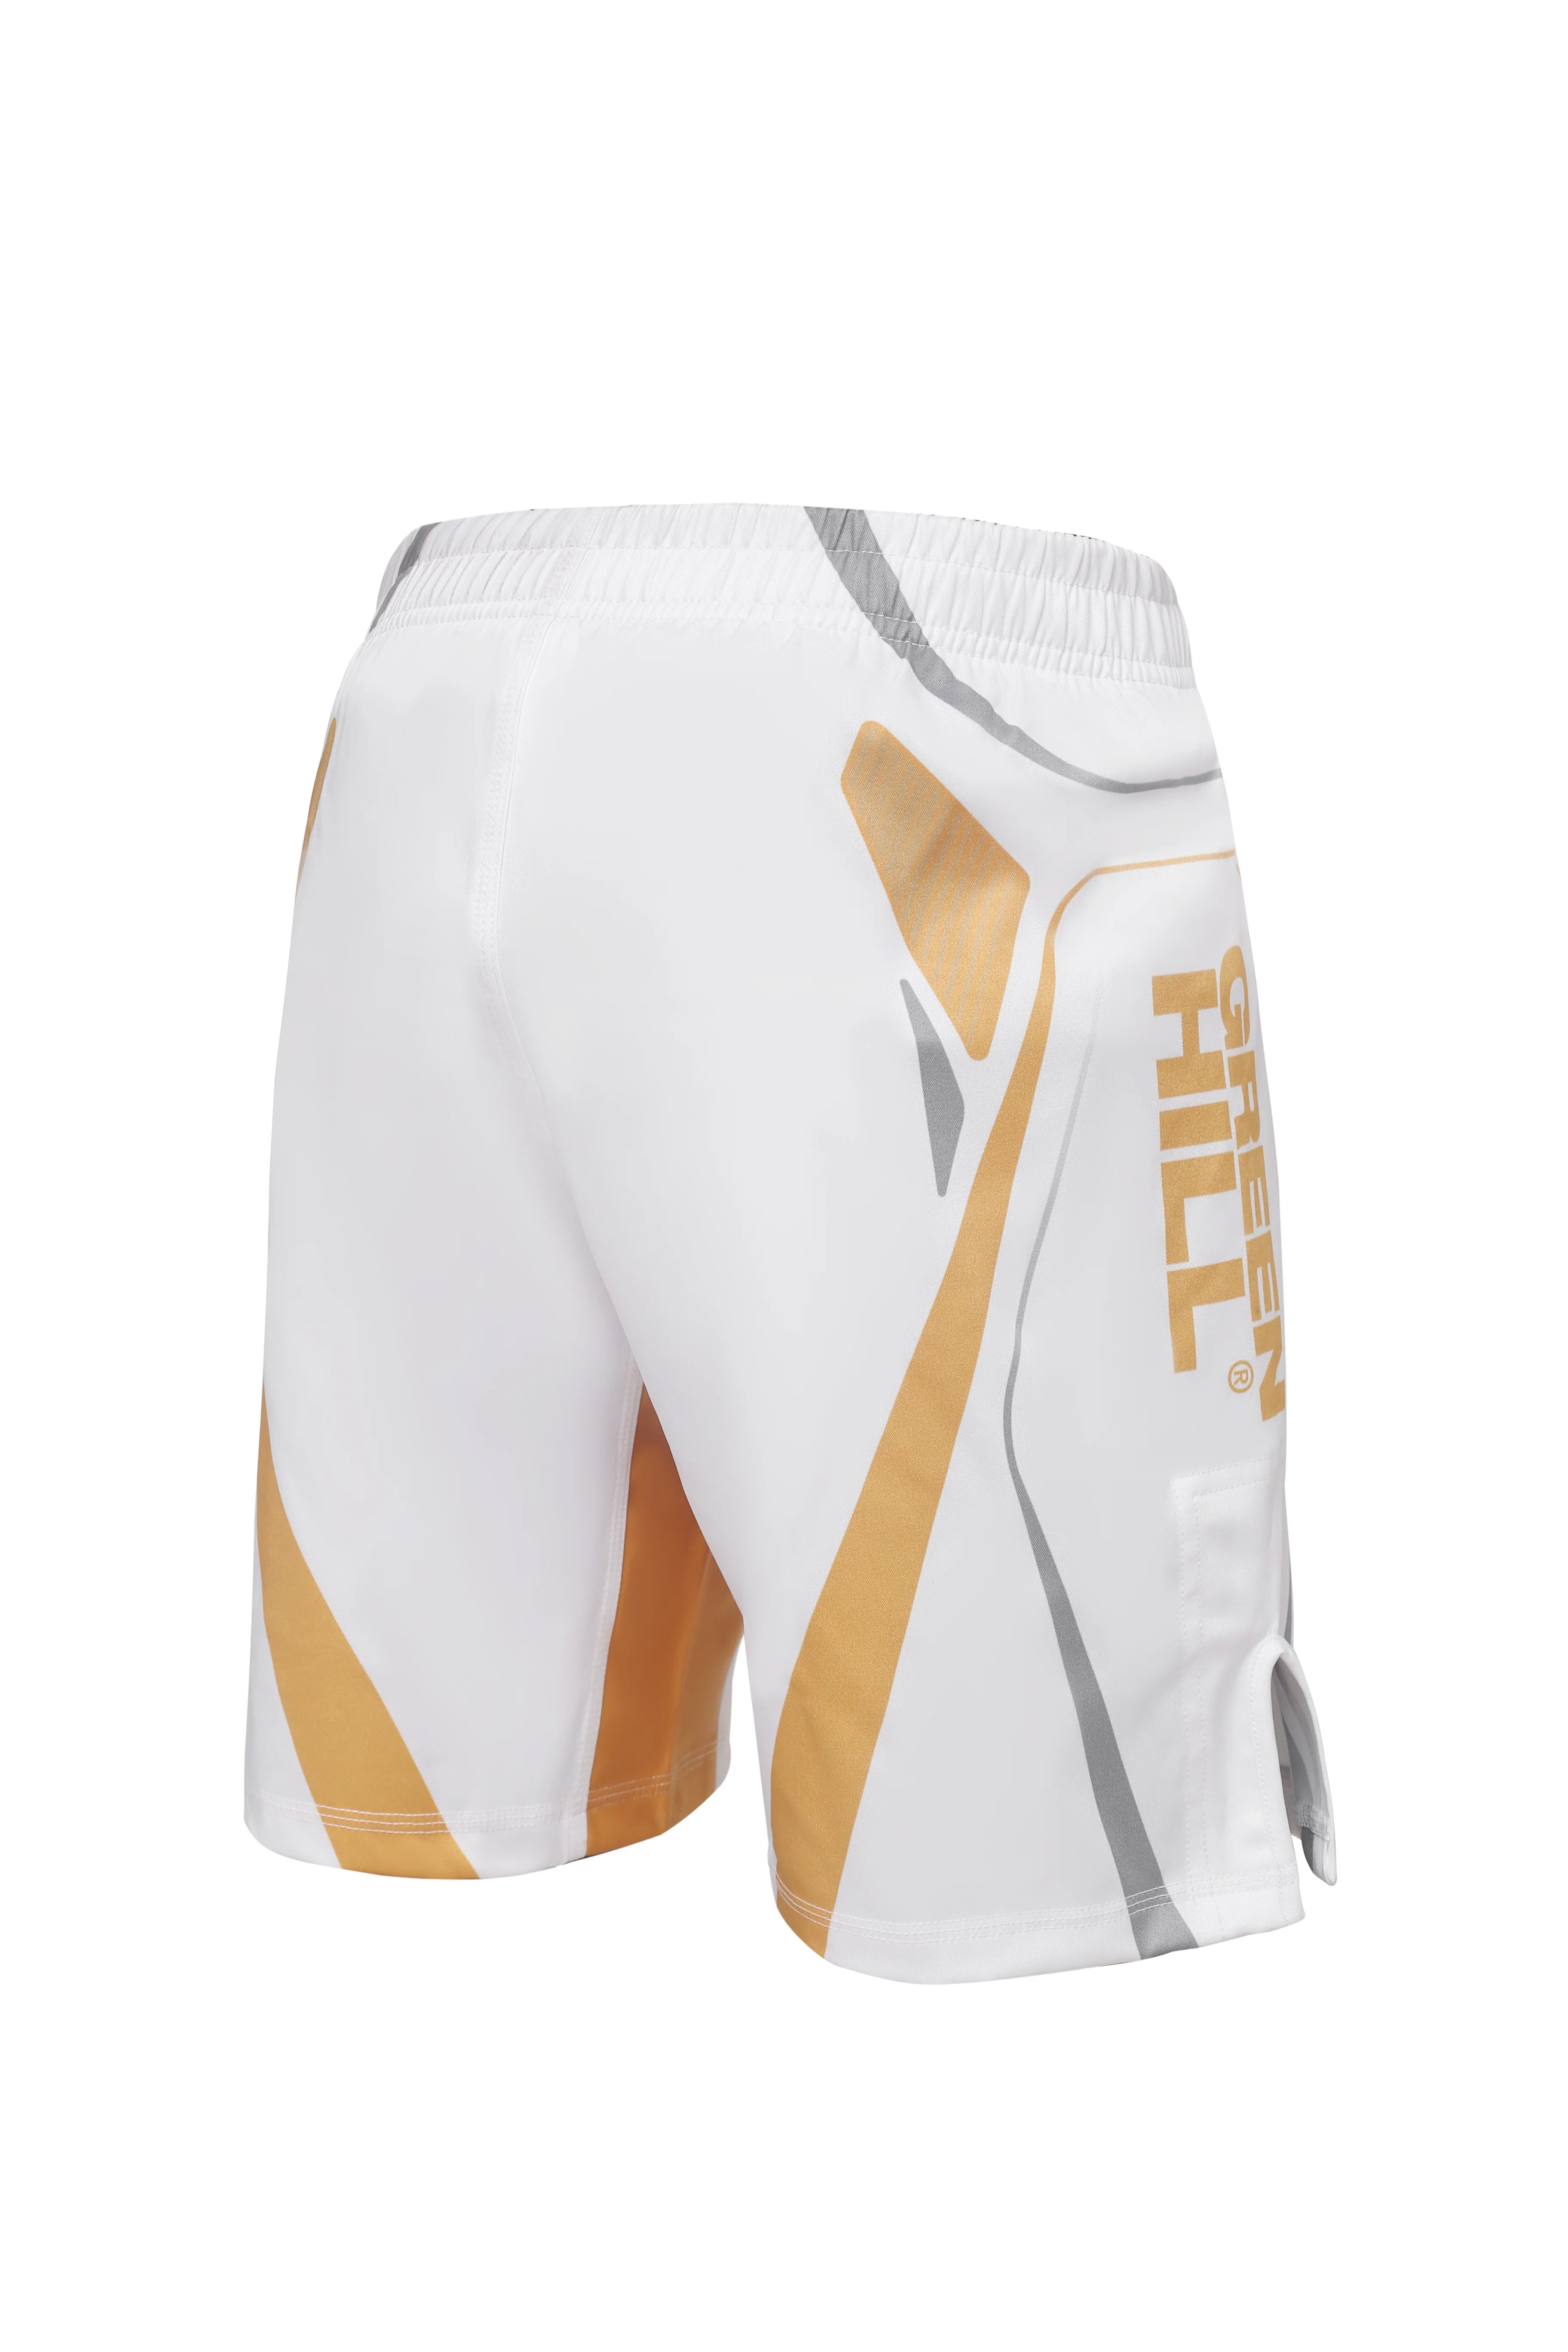 GREEN HILL NEW MMA SHORTS IMMAF WHITE APPROVED  2023